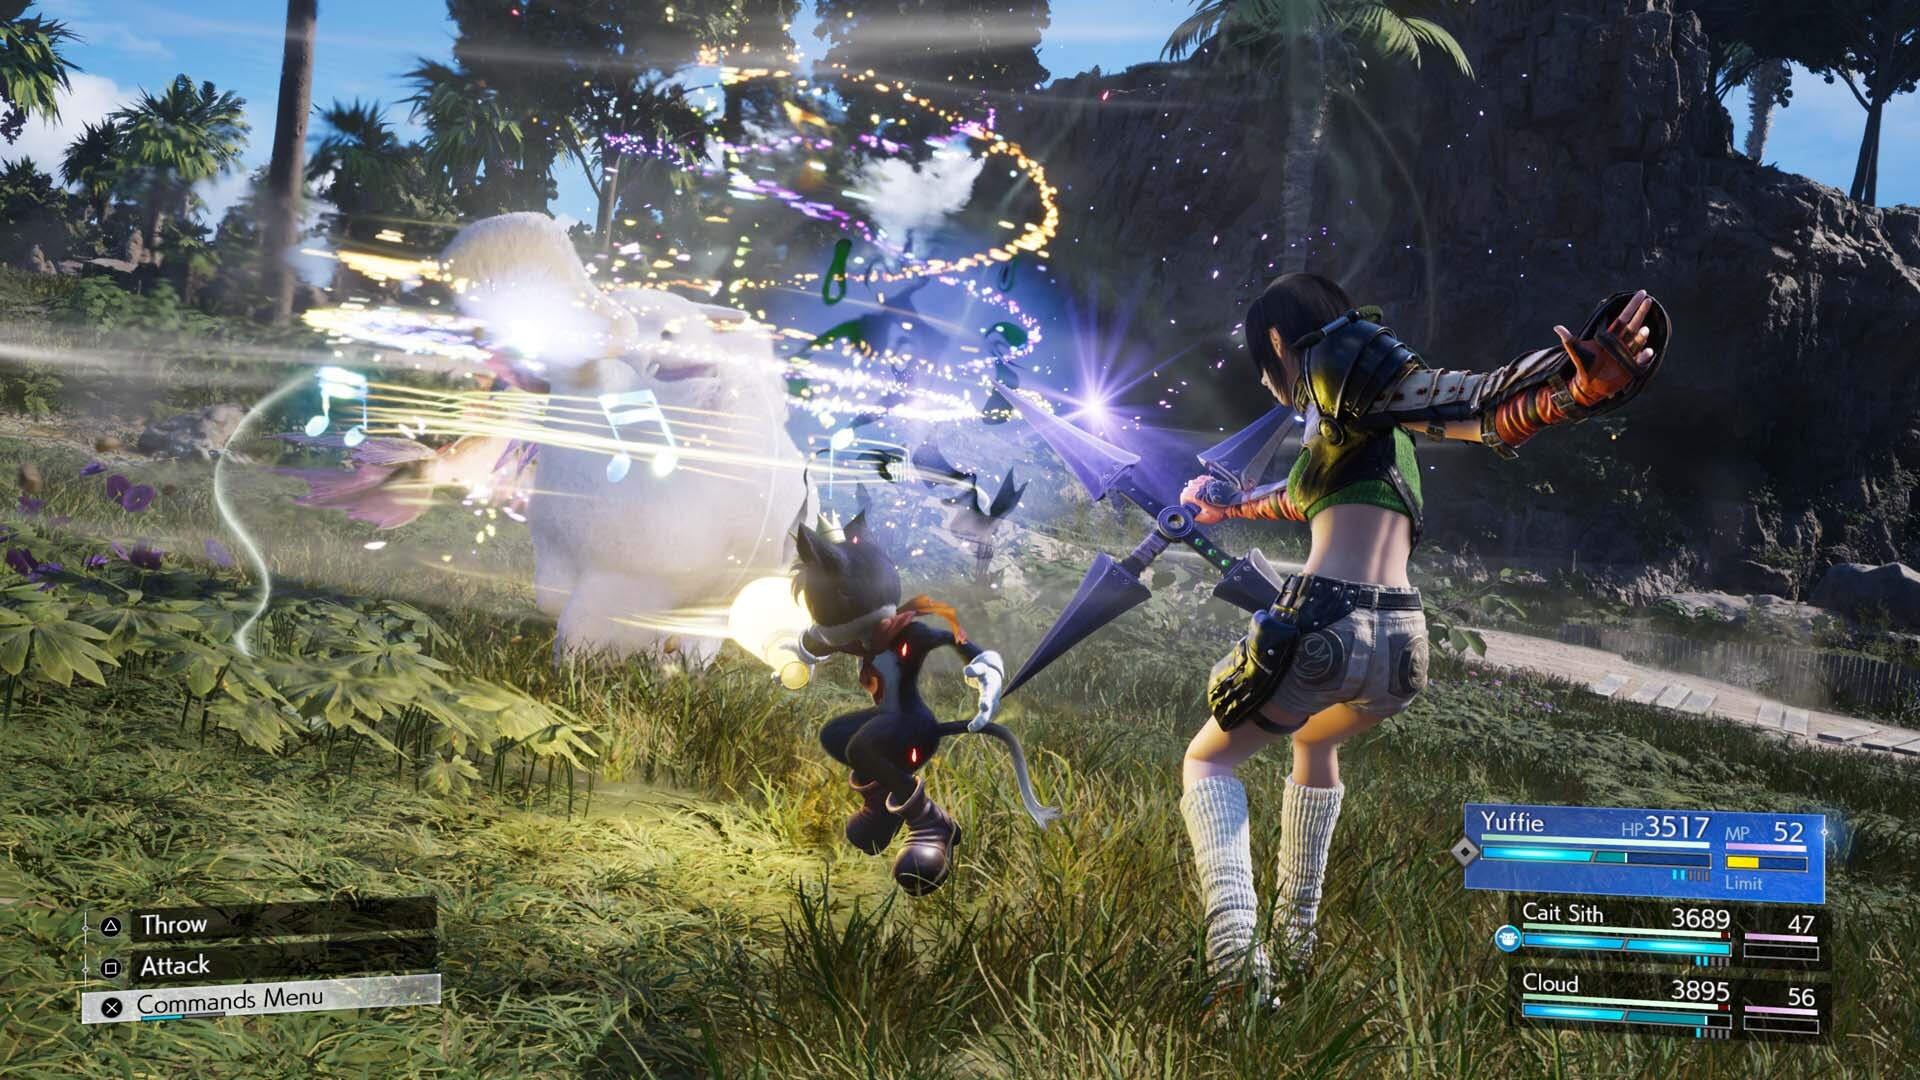 Yuffie and Cait Sith use a synergy attack